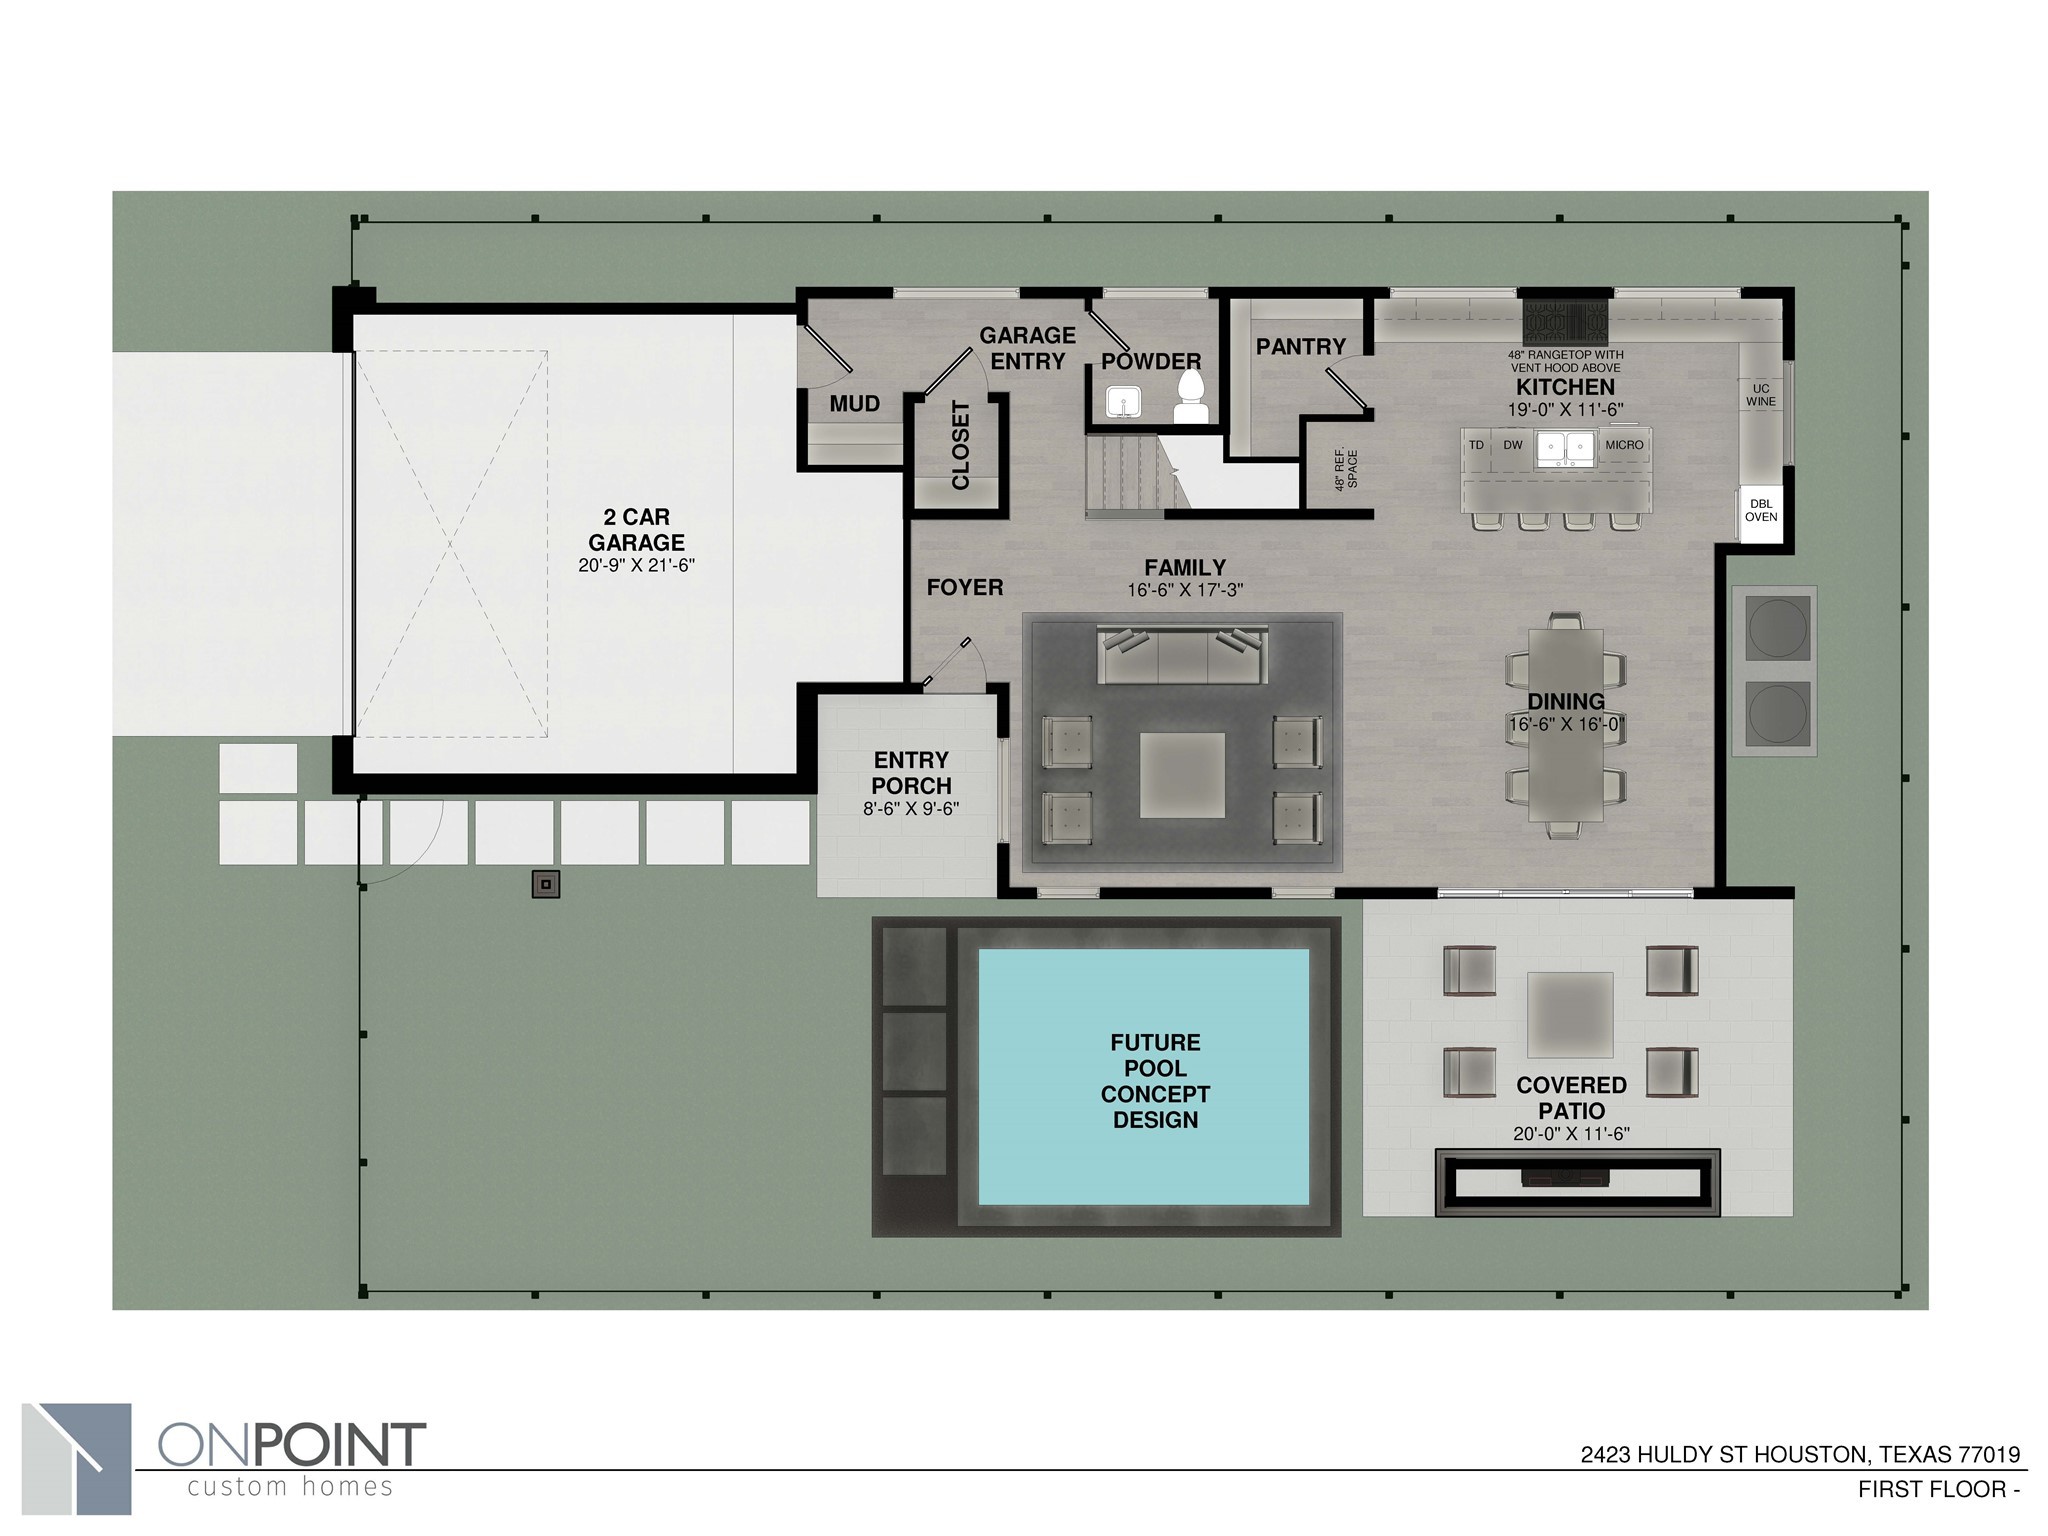 1st Floor sales plan - please note that pool is not included. Conceptual design only.